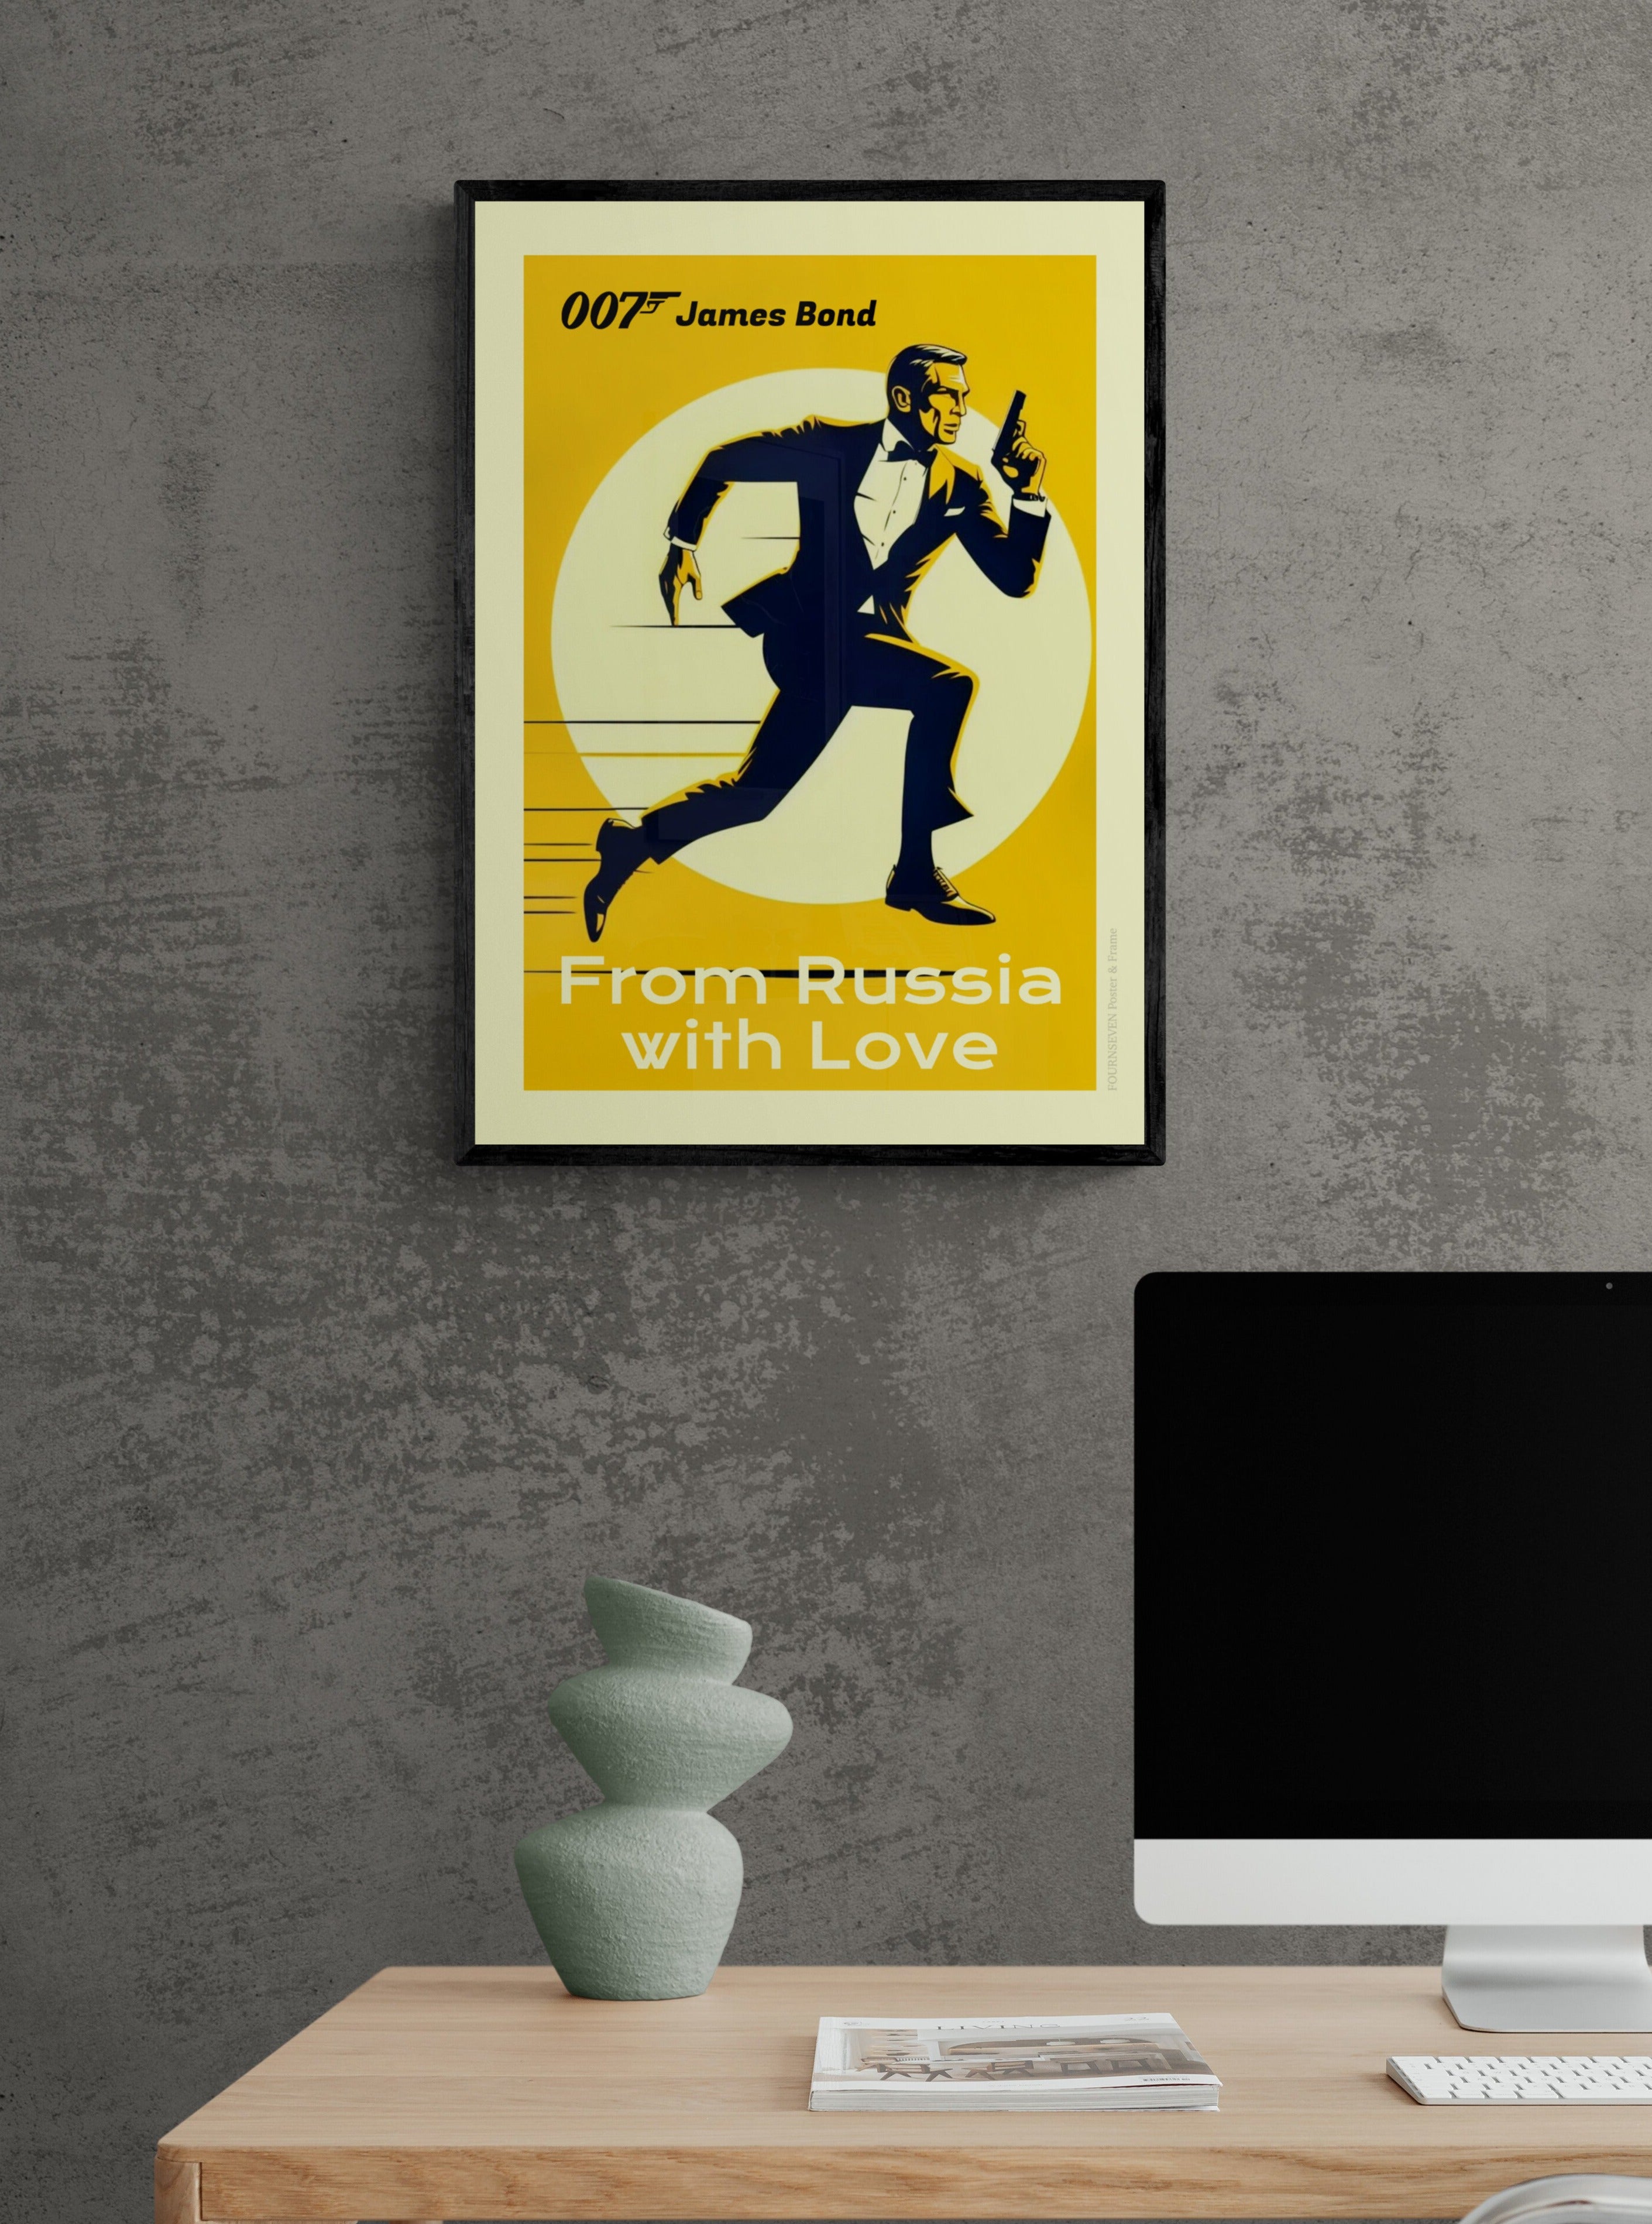 From Russia with Love. Agent 007 James Bond poster.